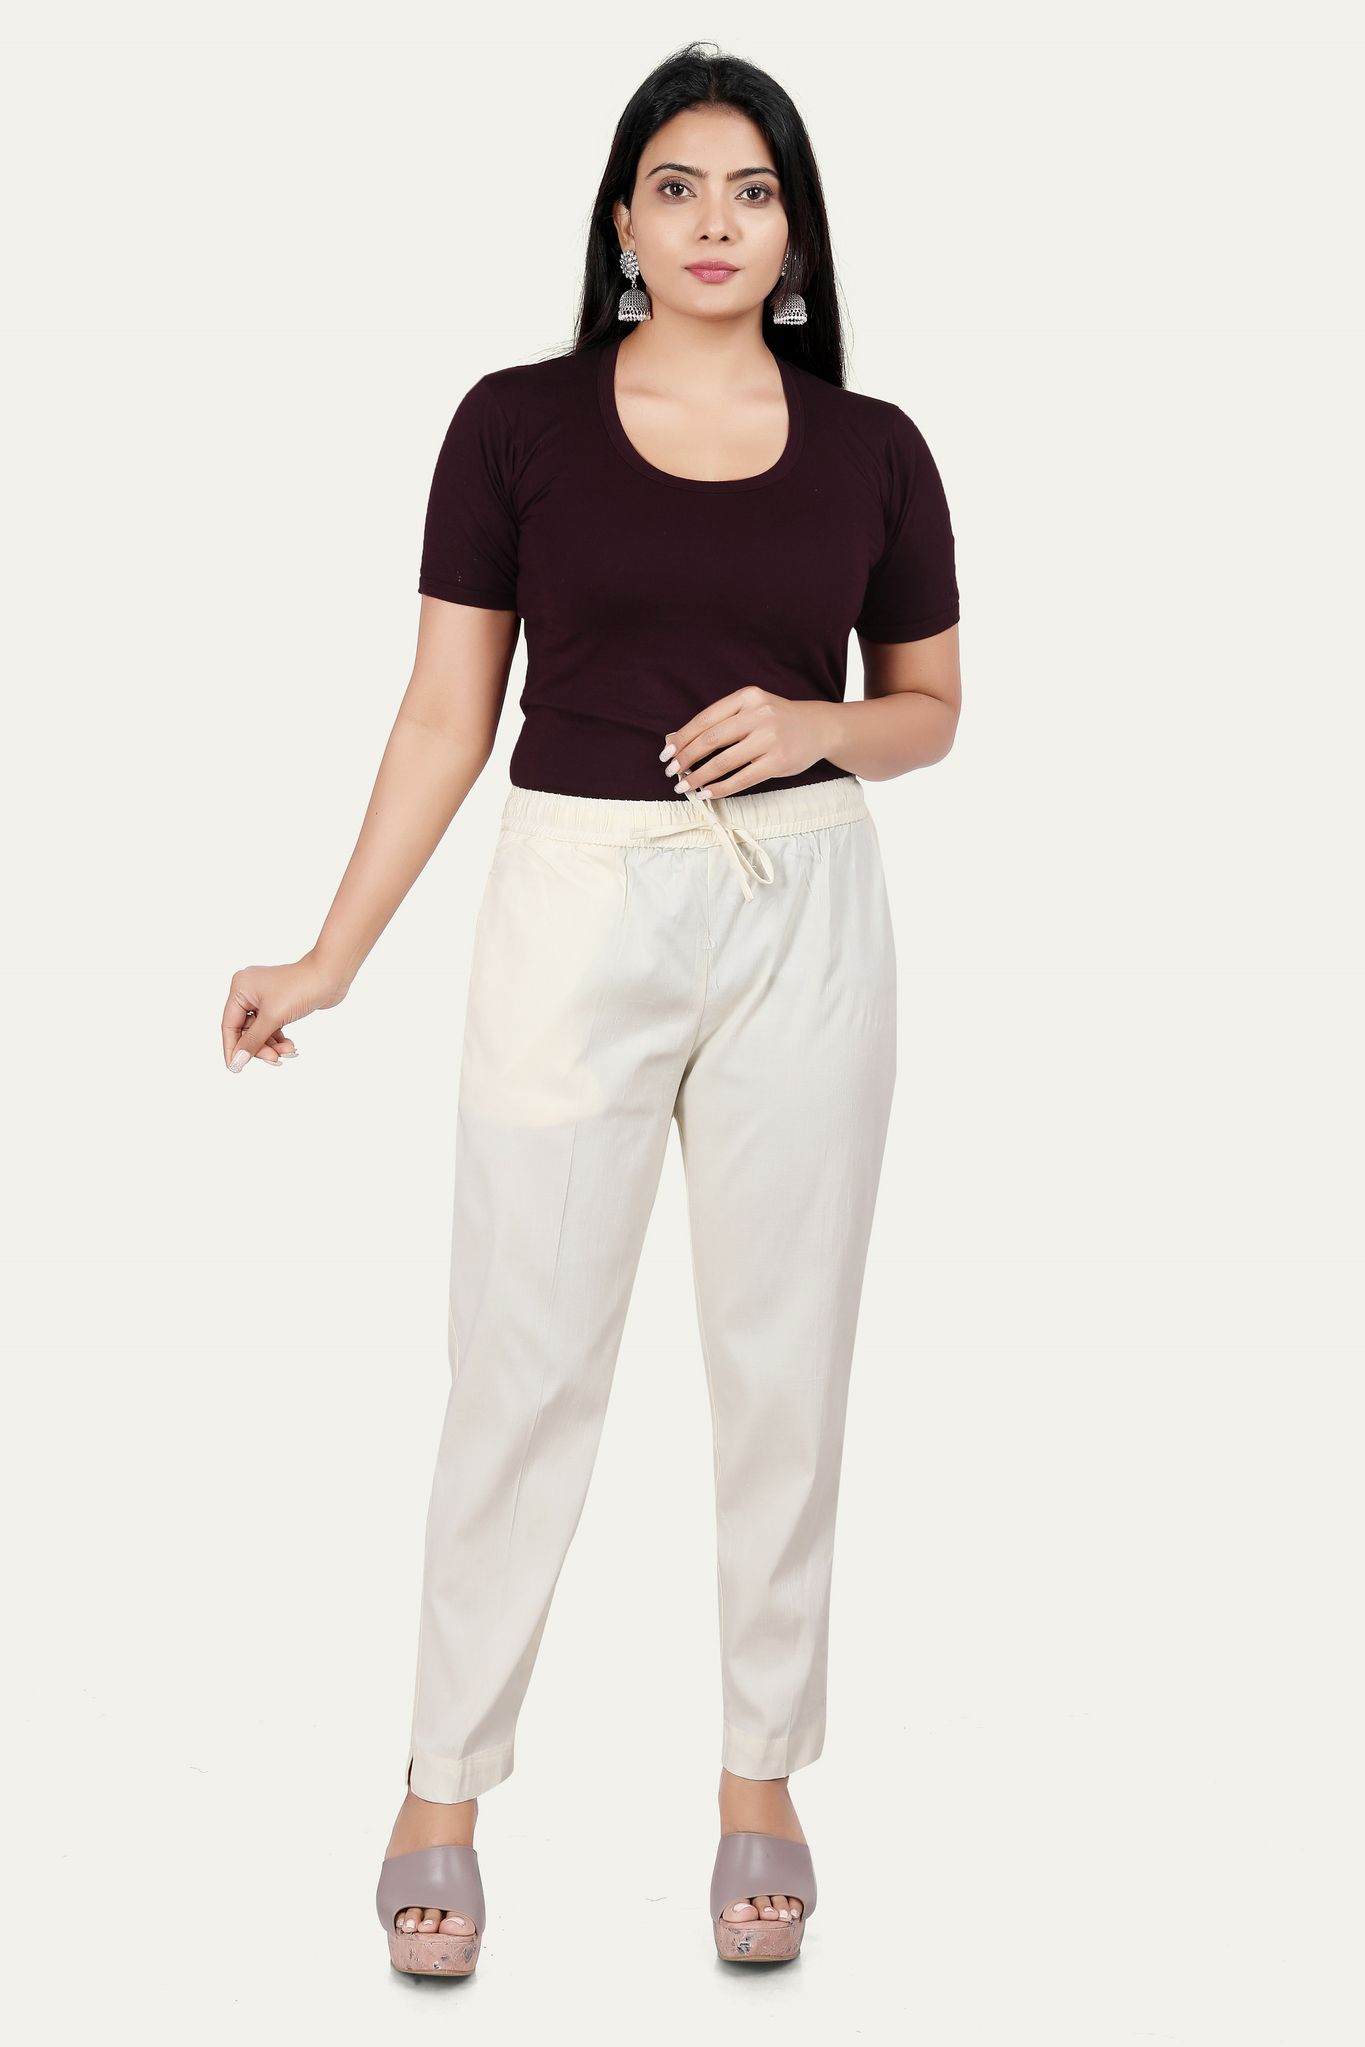 The 20 Best White Jeans for Summer - PureWow